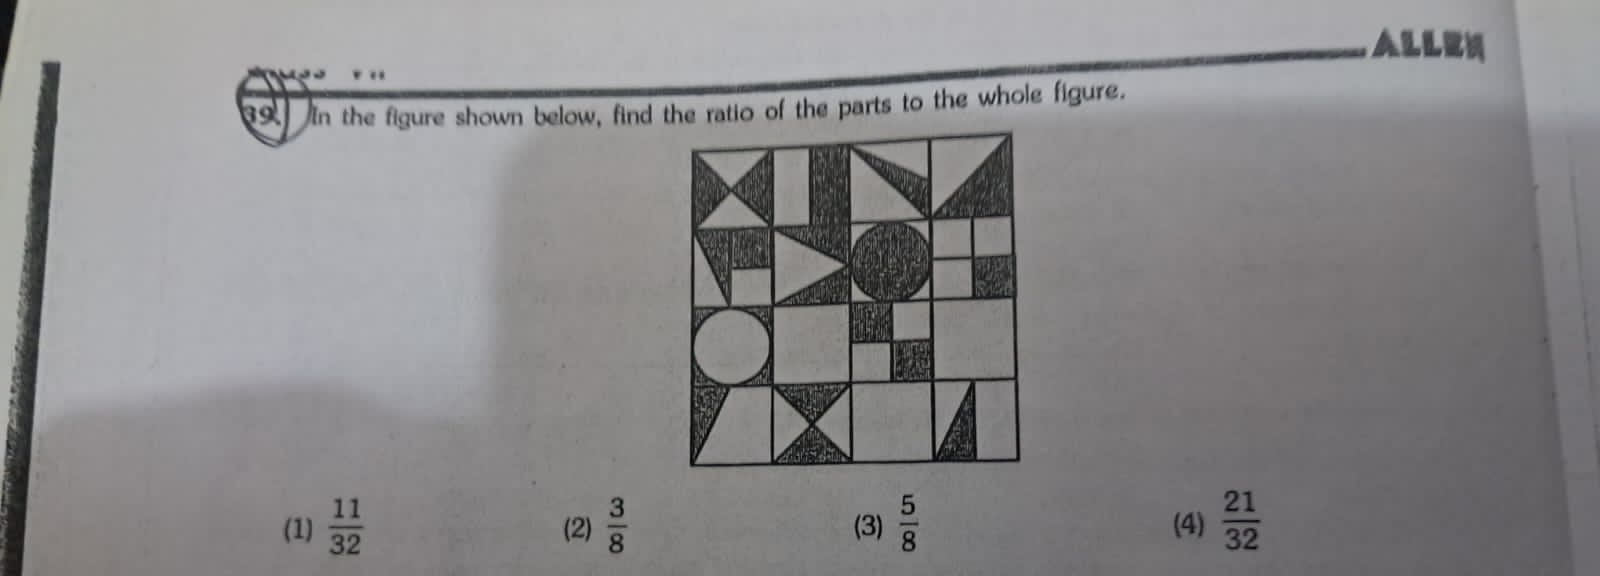  In the figure shown below, find the ratio of the parts to the whole f